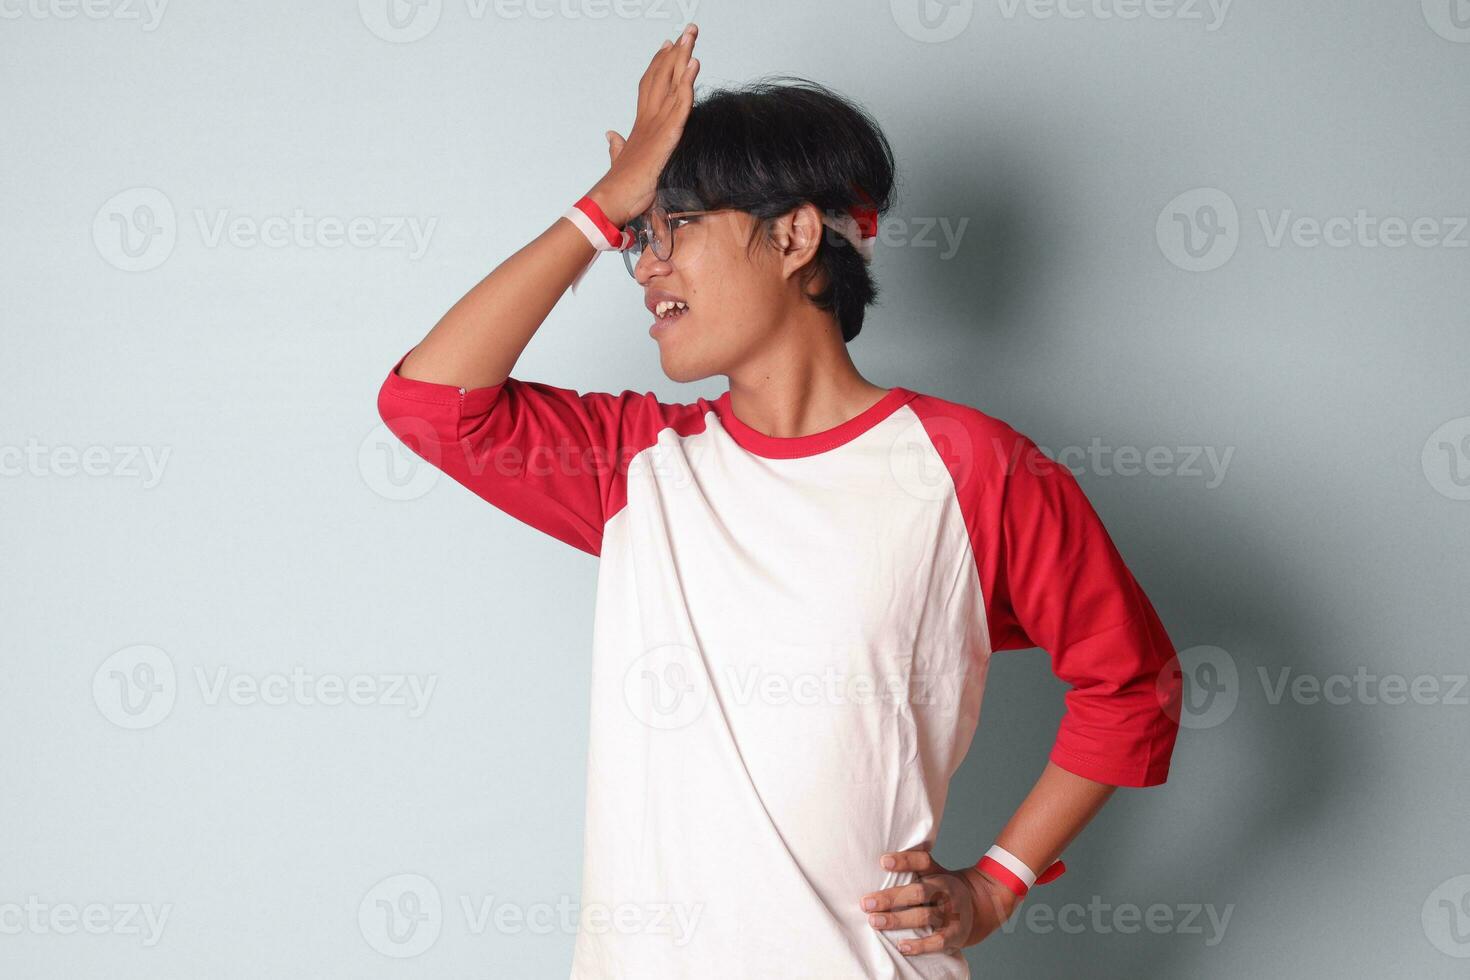 Portrait of attractive Asian man in t-shirt with red and white ribbon on head, having a migraine, touching his temple. Headache concept. Isolated image on gray background photo